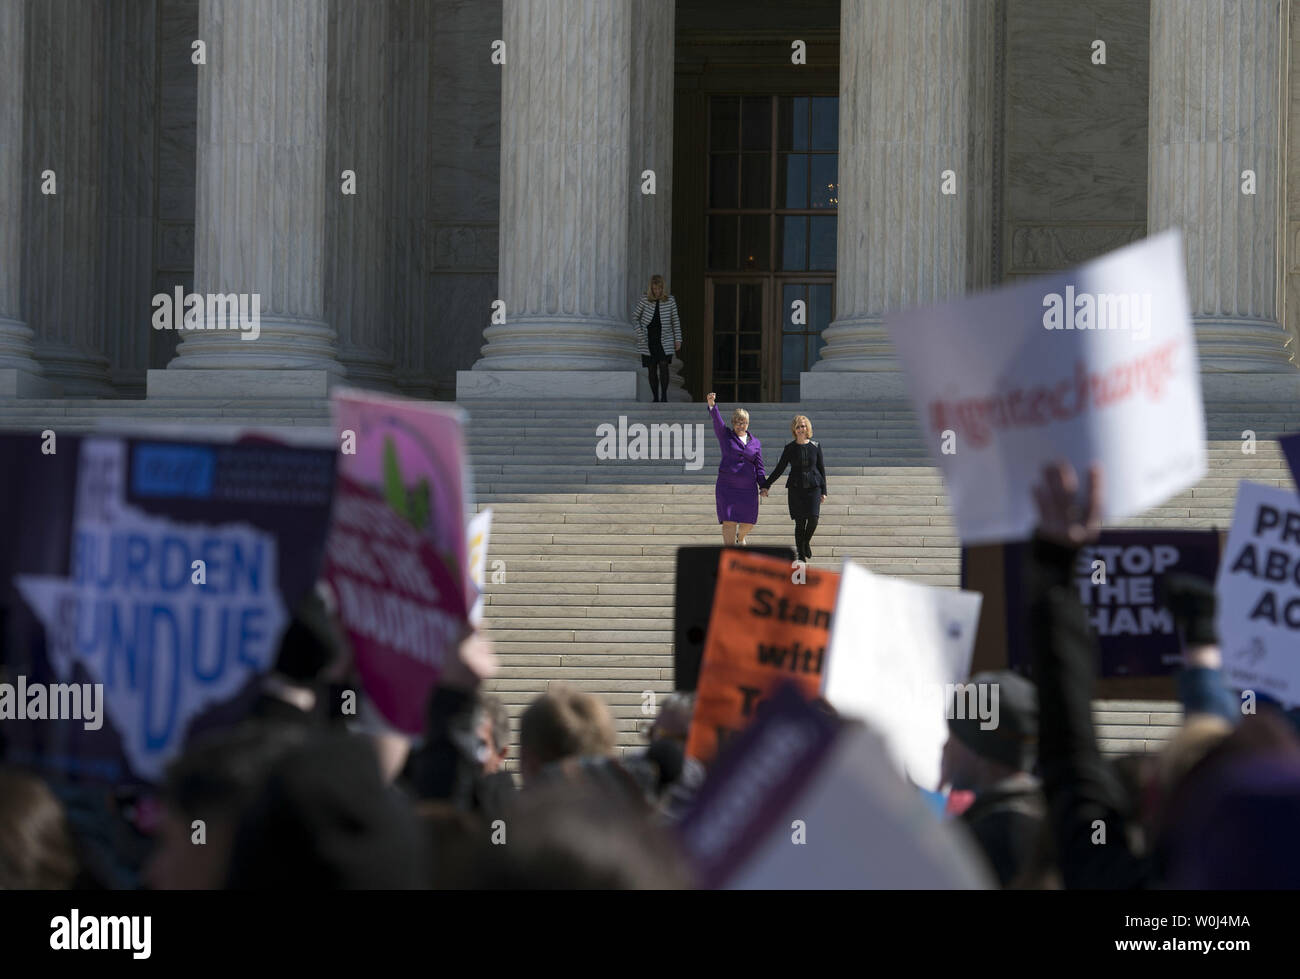 Lead plaintiff Amy Hagstrom Miller (L), CEO of Whole Woman's Health, and Nancy Northup, CEO of Center for Reproductive Rights, are seen through protestors signs as they walk down the steps of the Supreme Court after the Court heard arguments in the Whole Woman’s Health v. Hellerstedt case, at the Supreme Court in Washington, D.C. on March 2, 2016. The case The case will decide the legality of a 2013 Texas law that plaintiffs say restricts a woman's constitutional right to end a pregnancy by putting an 'undue burden' on them. Photo by Kevin Dietsch/UPI Stock Photo